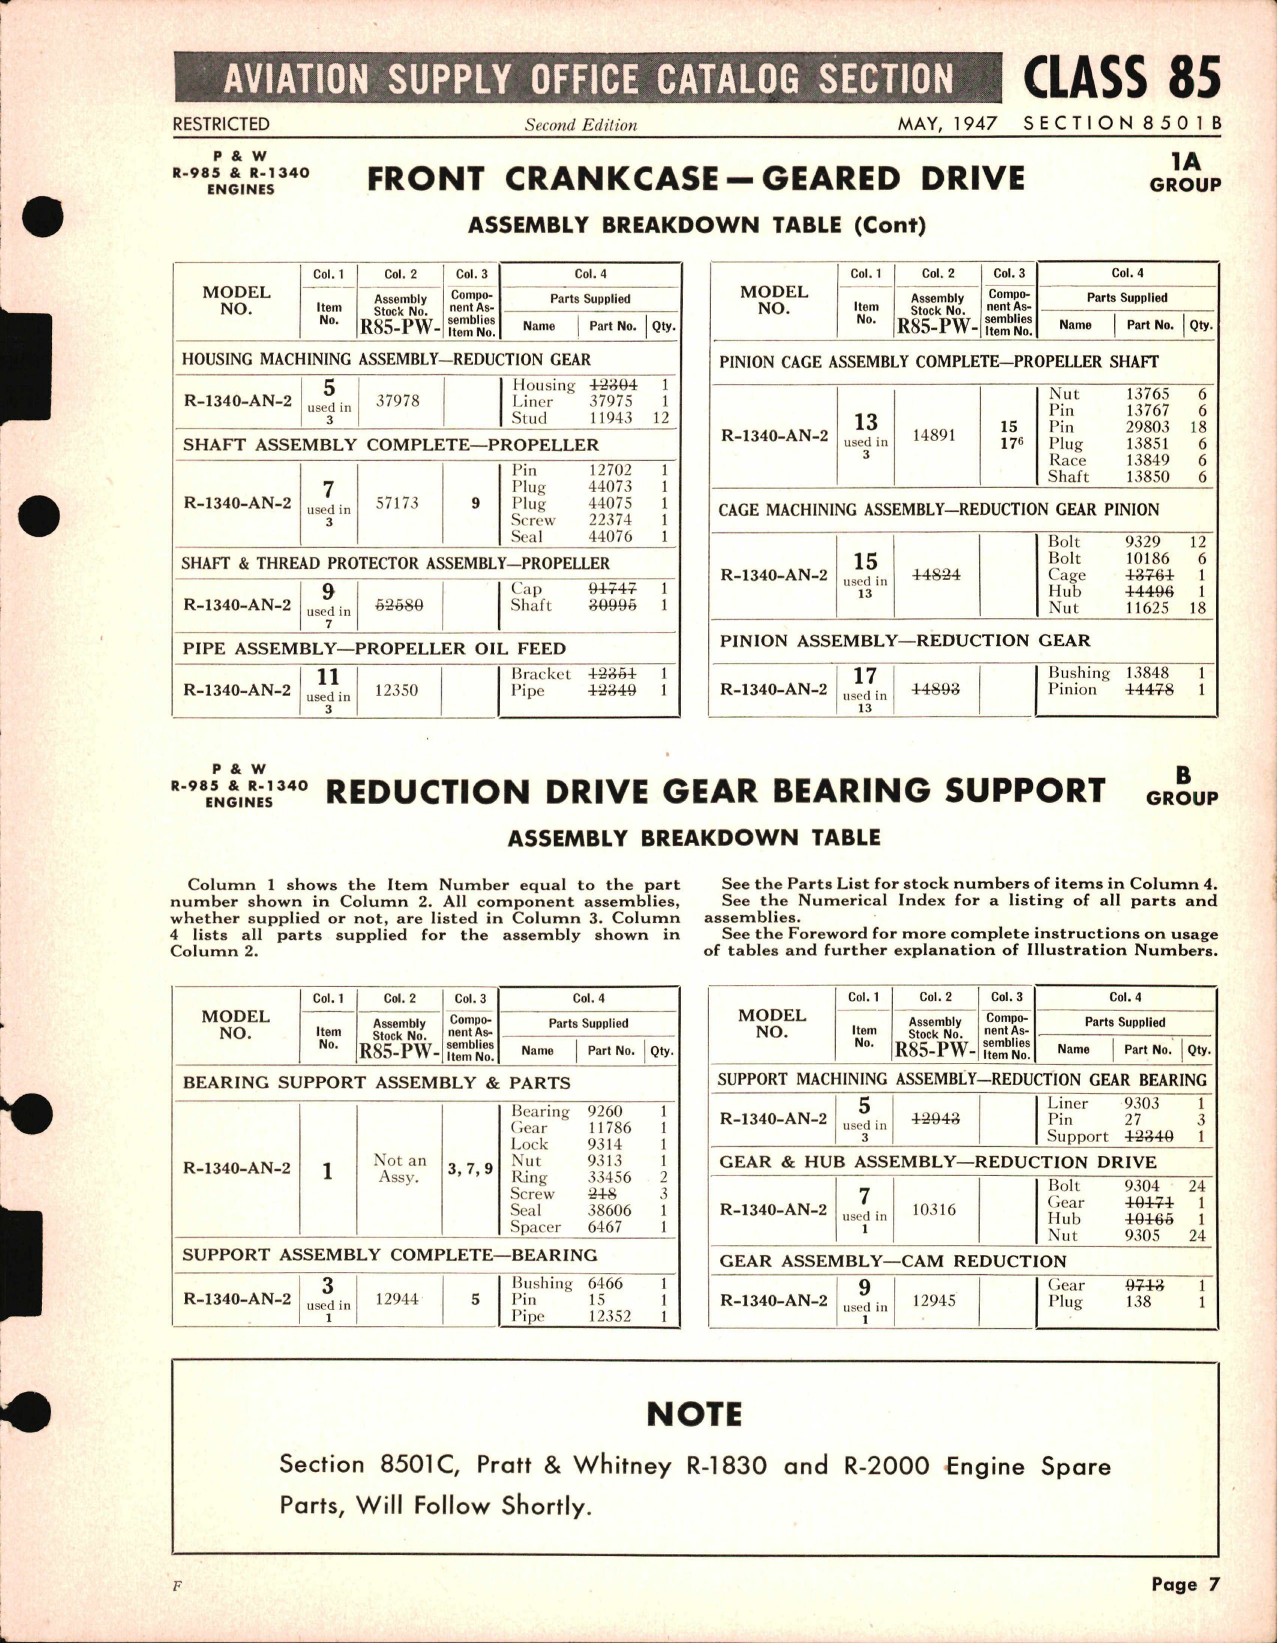 Sample page 7 from AirCorps Library document: Pratt & Whitney Spare Parts for Pratt & Whitney Engines R985-AN-1, -3, -6, -12, R-1340-AN-1, and -2